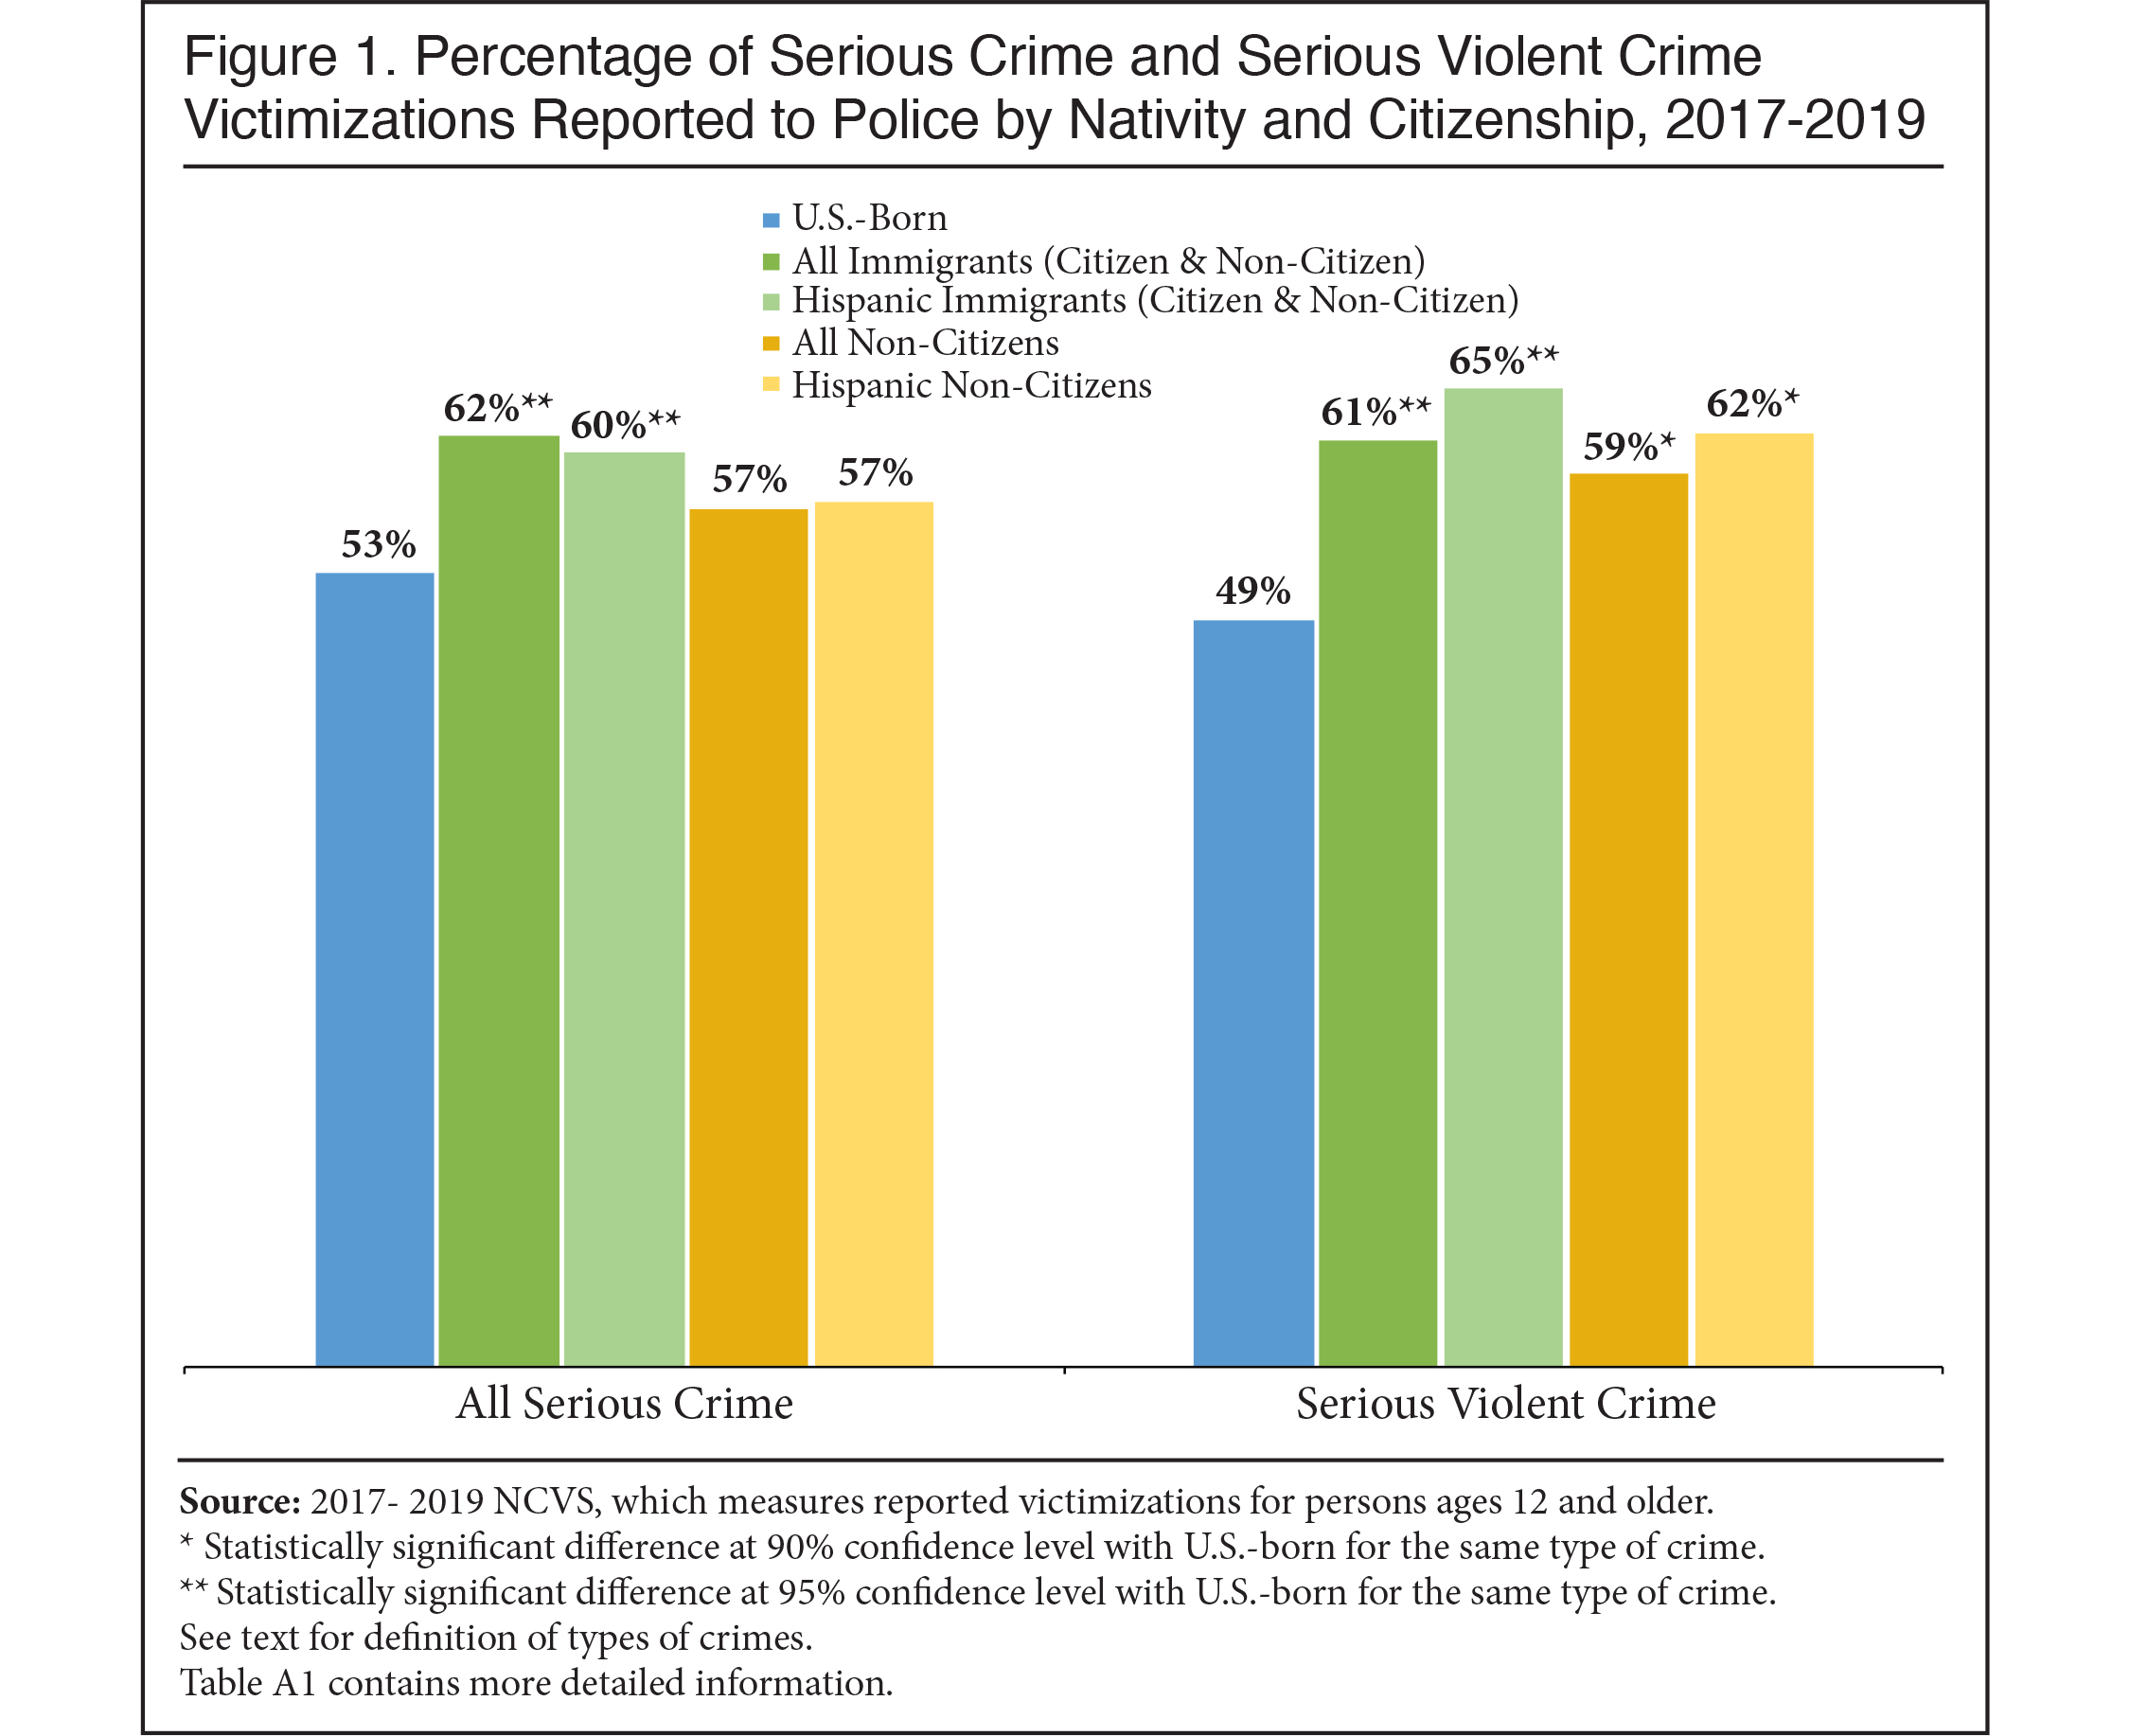 Graph: Percentage of Serious Crime and Serious Violent Crime Victimizations Reported to Police by Nativity and Citizenship